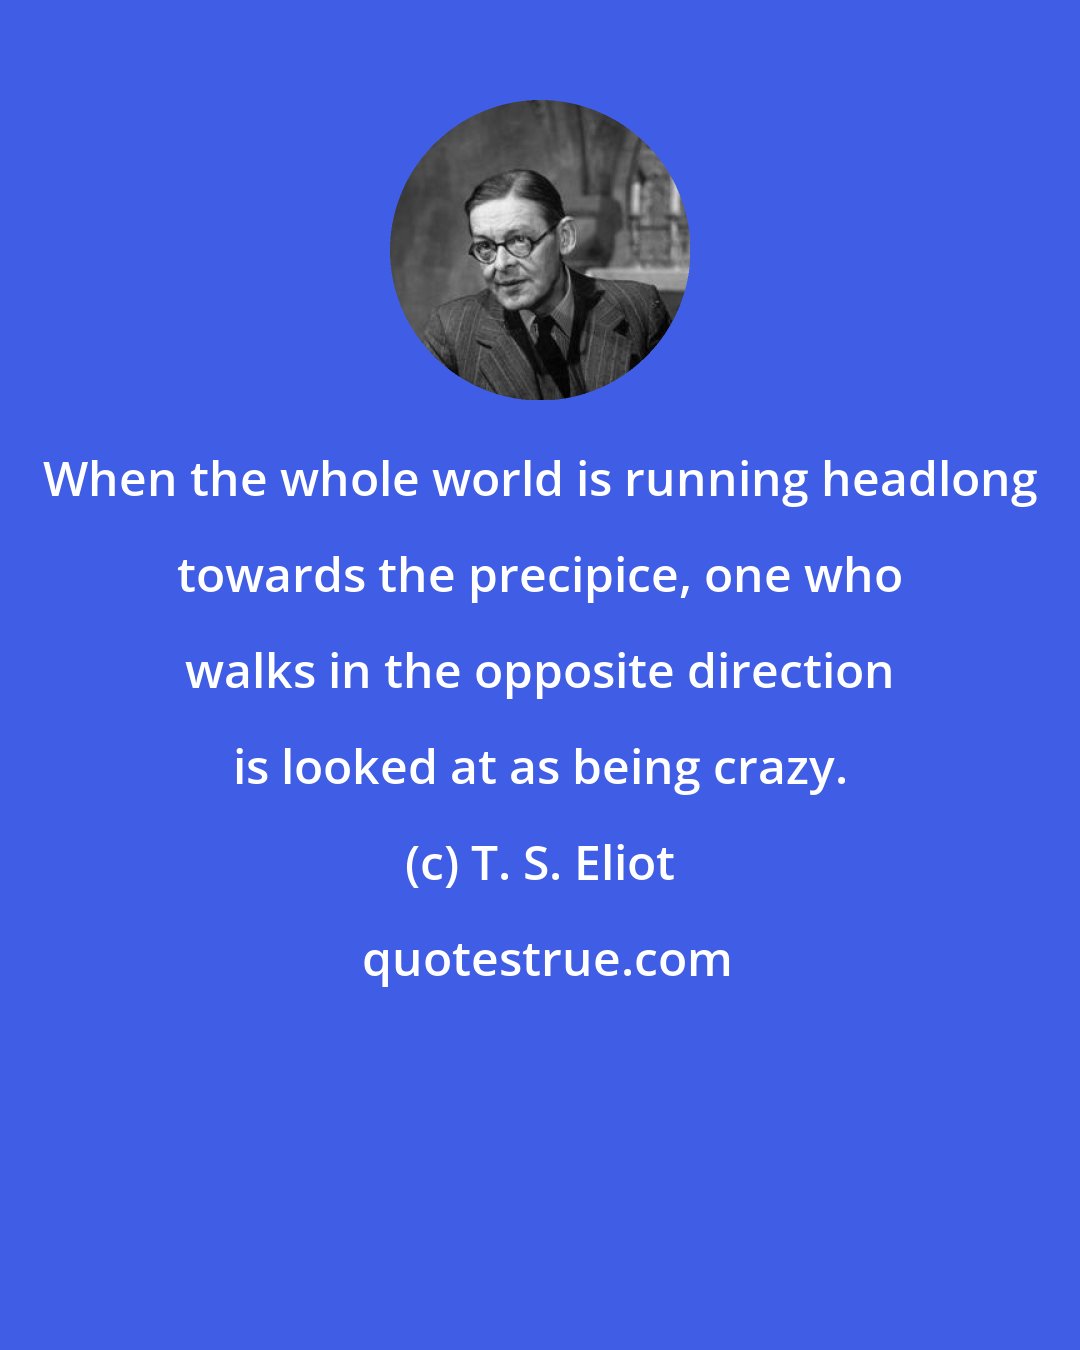 T. S. Eliot: When the whole world is running headlong towards the precipice, one who walks in the opposite direction is looked at as being crazy.